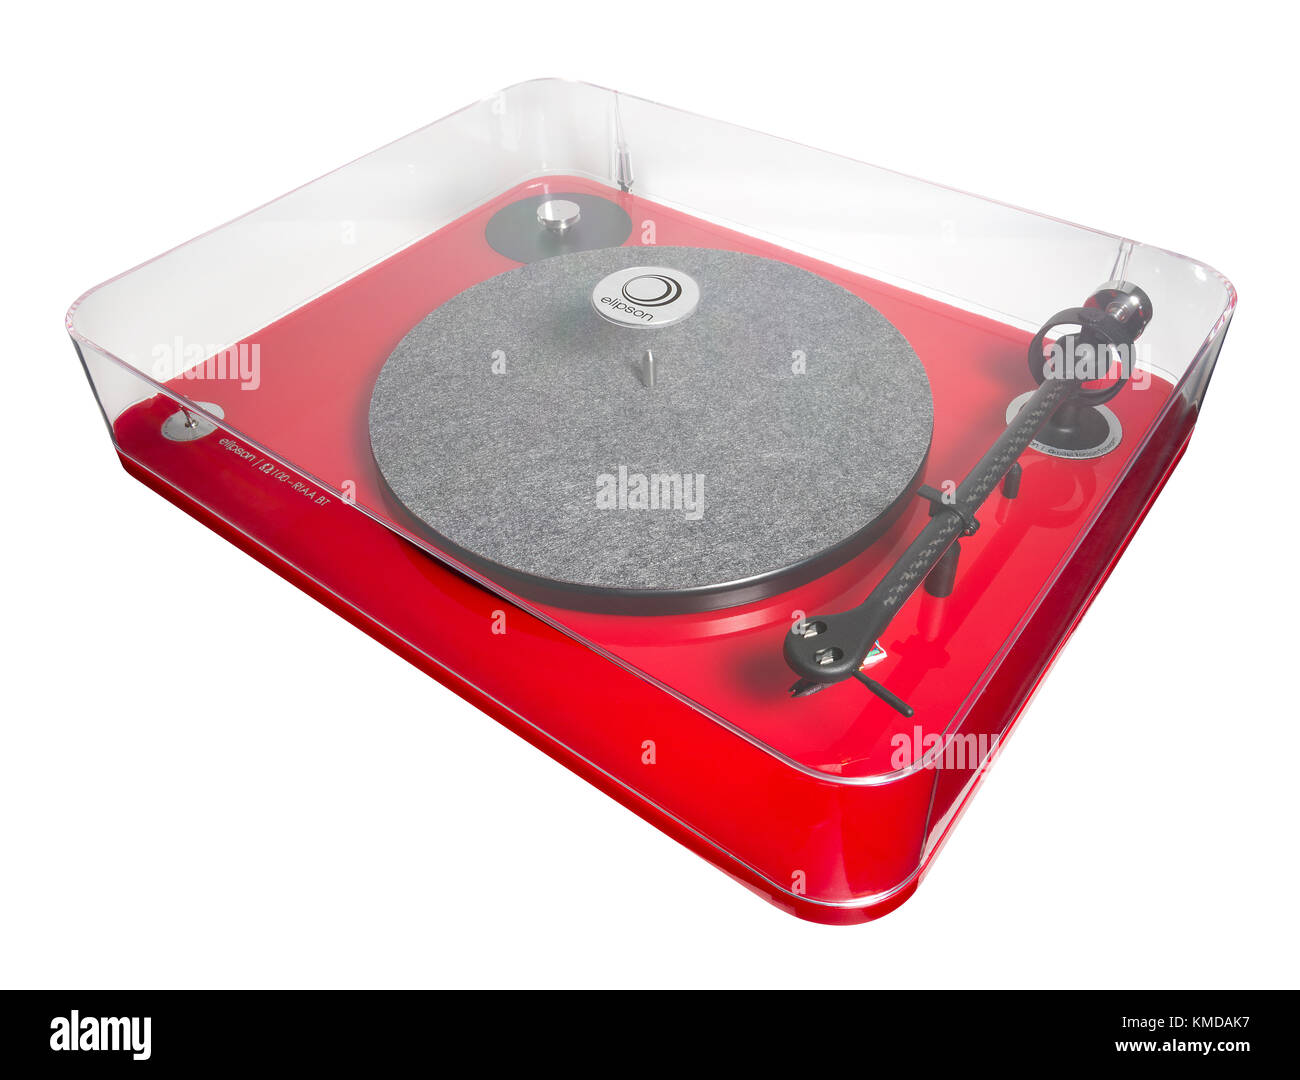 Elipson turntable for playing vinyl records. Stock Photo